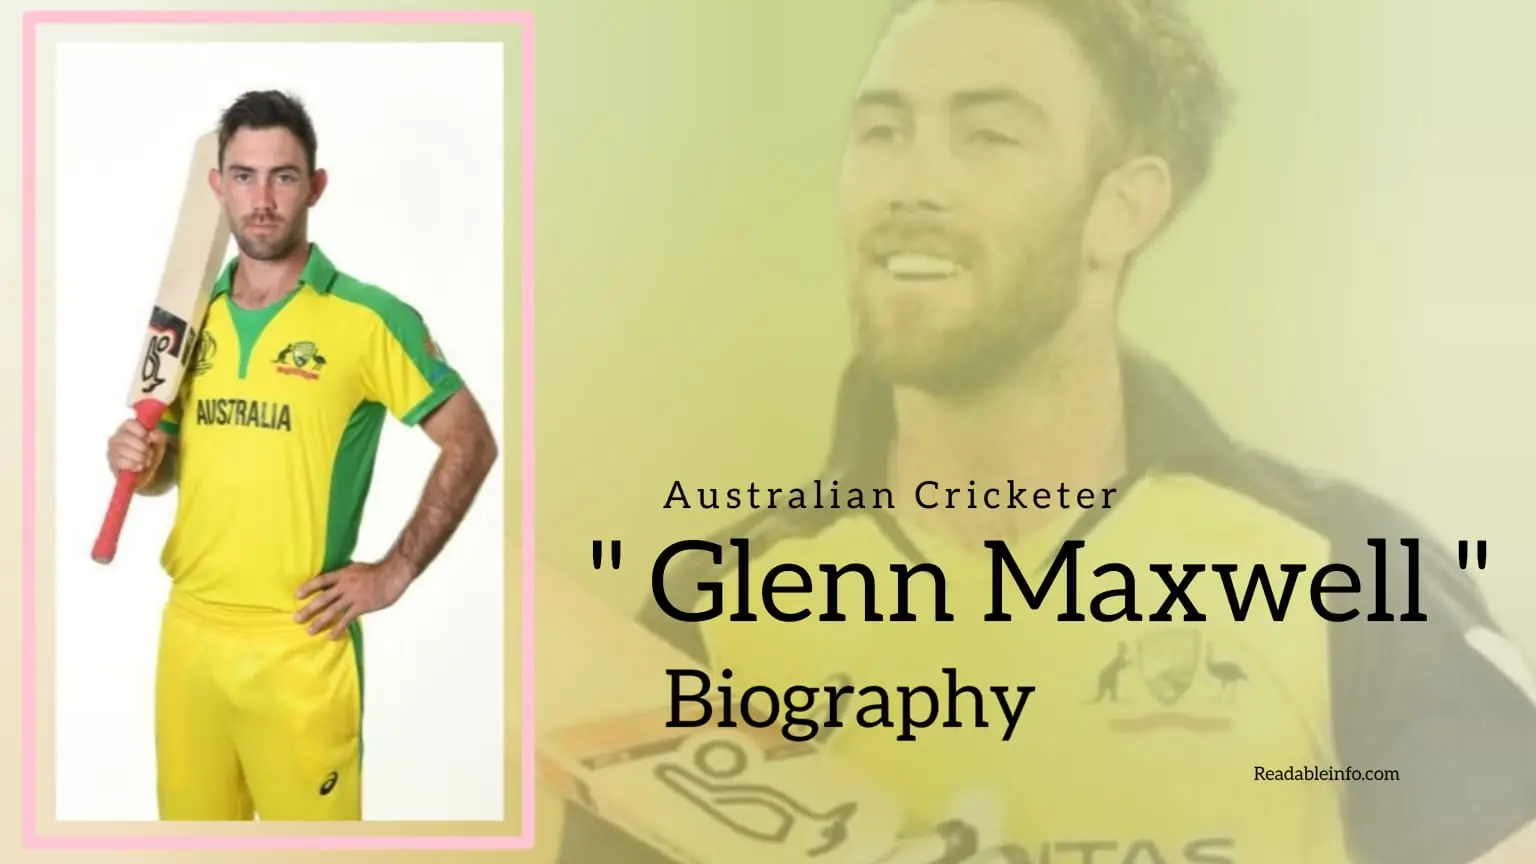 You are currently viewing Glenn Maxwell Biography (Australian Cricketer)